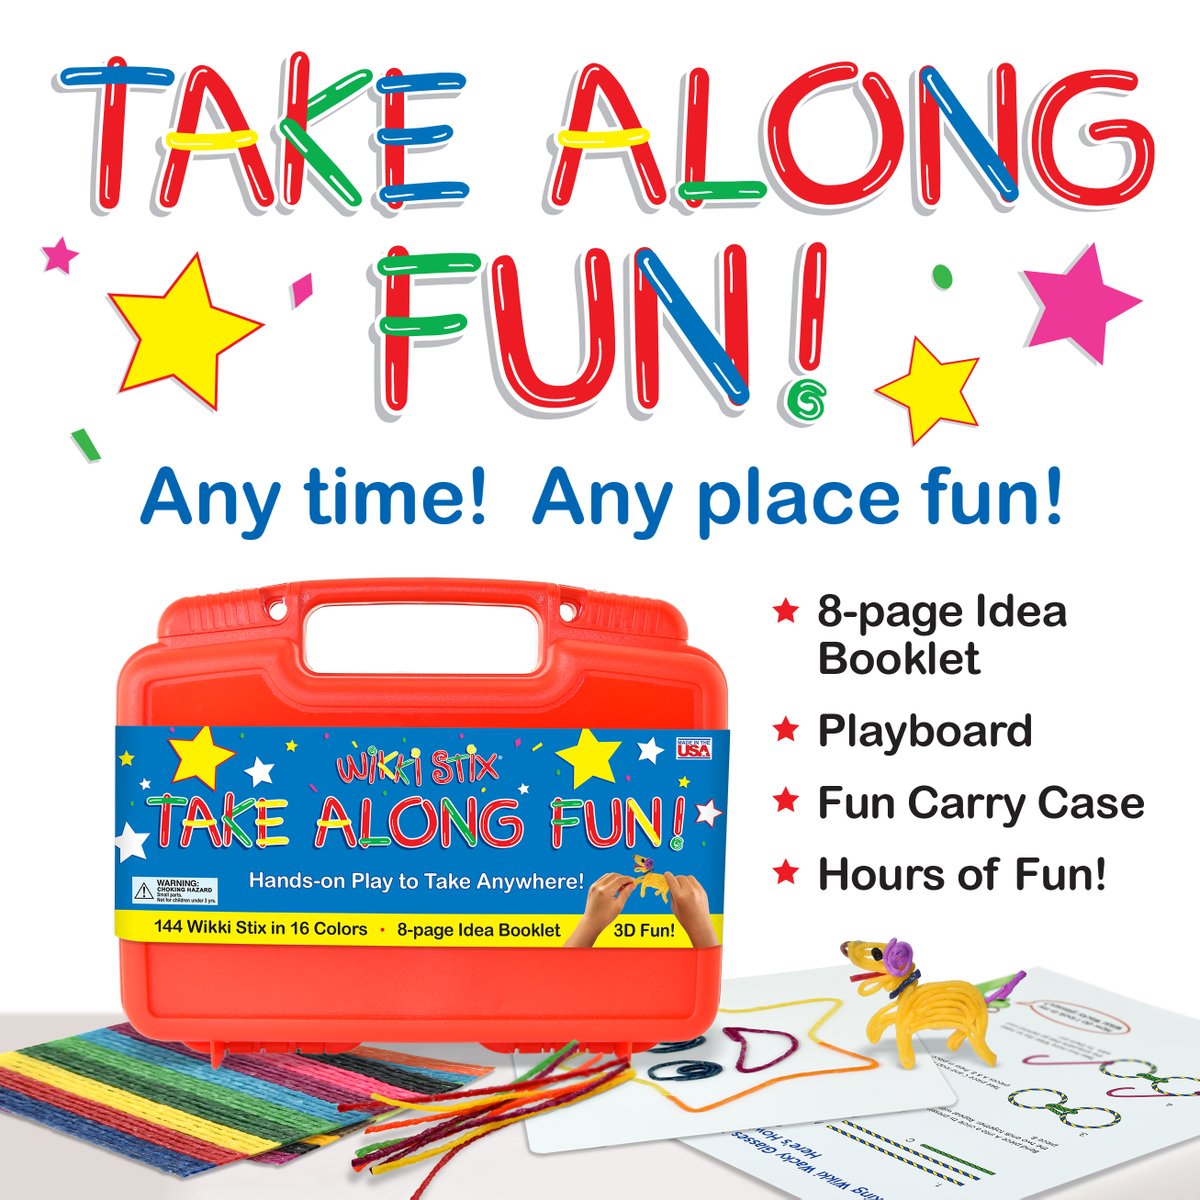 Take Along Fun! Perfect for travel, in the car or on a plane. 25% OFF on Amazon! Limited time. amazon.com/dp/B011MIQ8DQ/ #wikkistix #travelwithkids #kidtravel #Amazonfinds